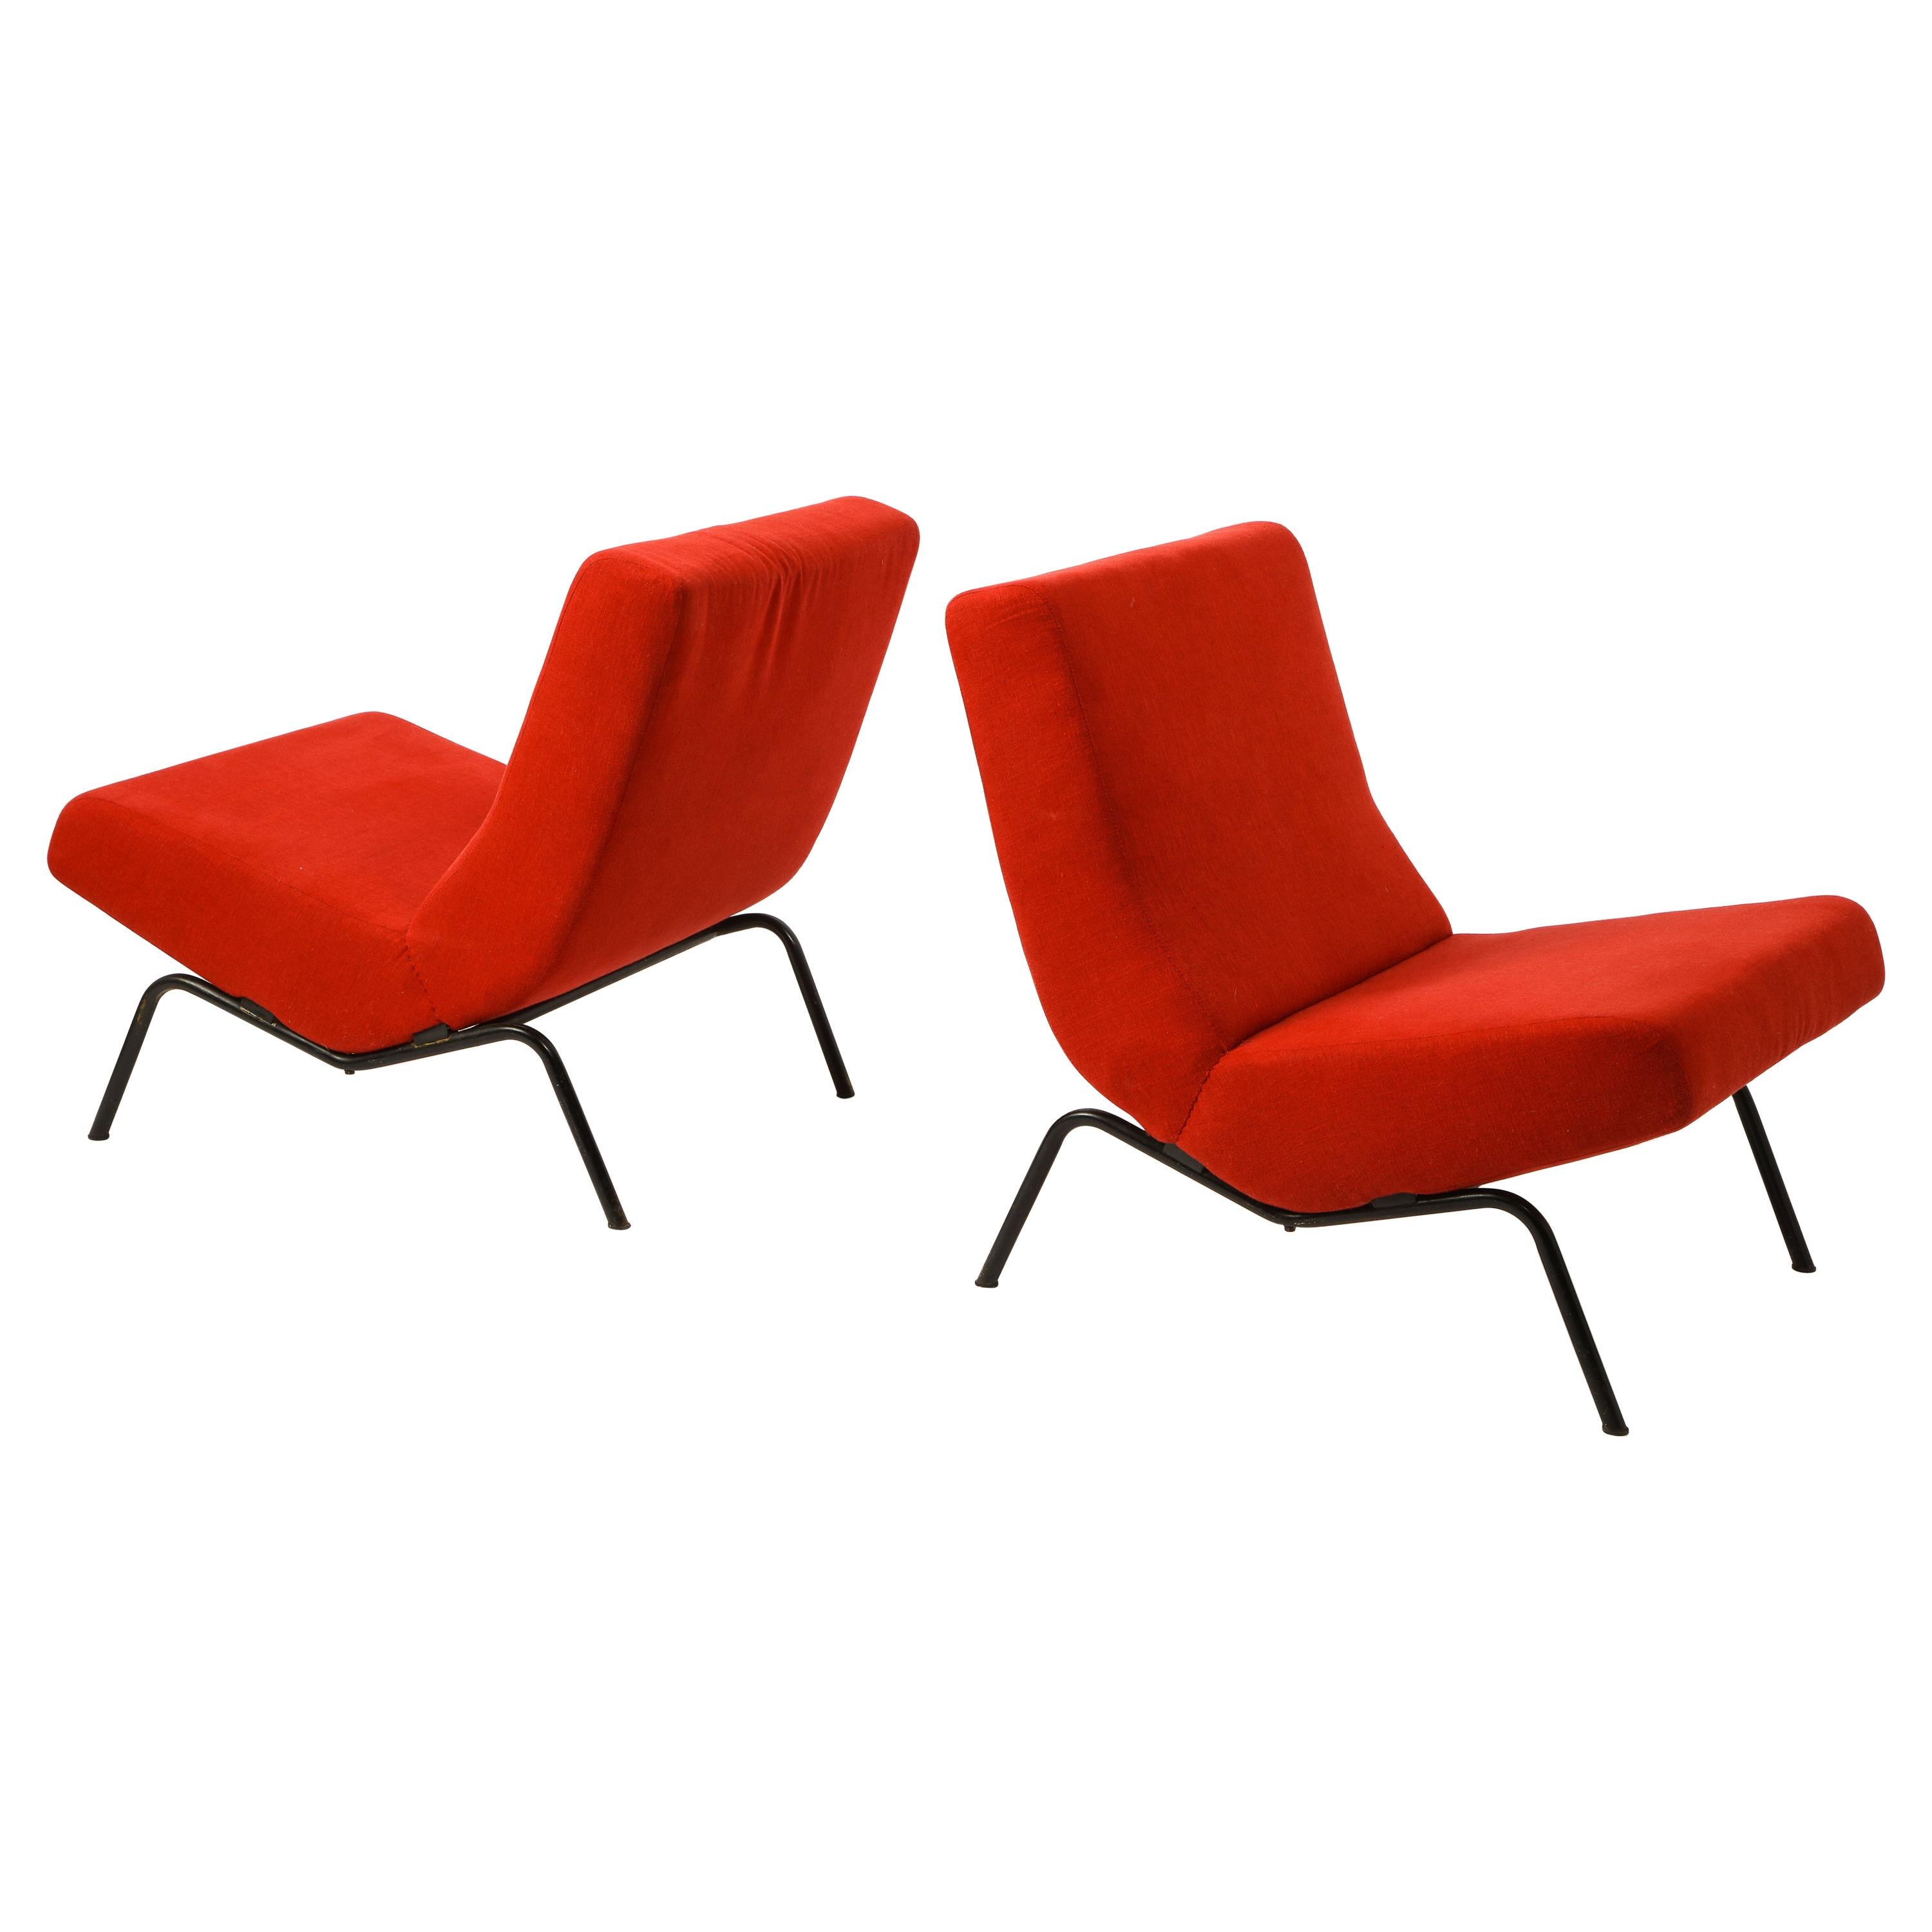 Low back slipper chairs model CM 195 by Pierre Paulin for Artifort, a pioneering model of foam over metal in residential seating. These examples in original patina with new upholstery.